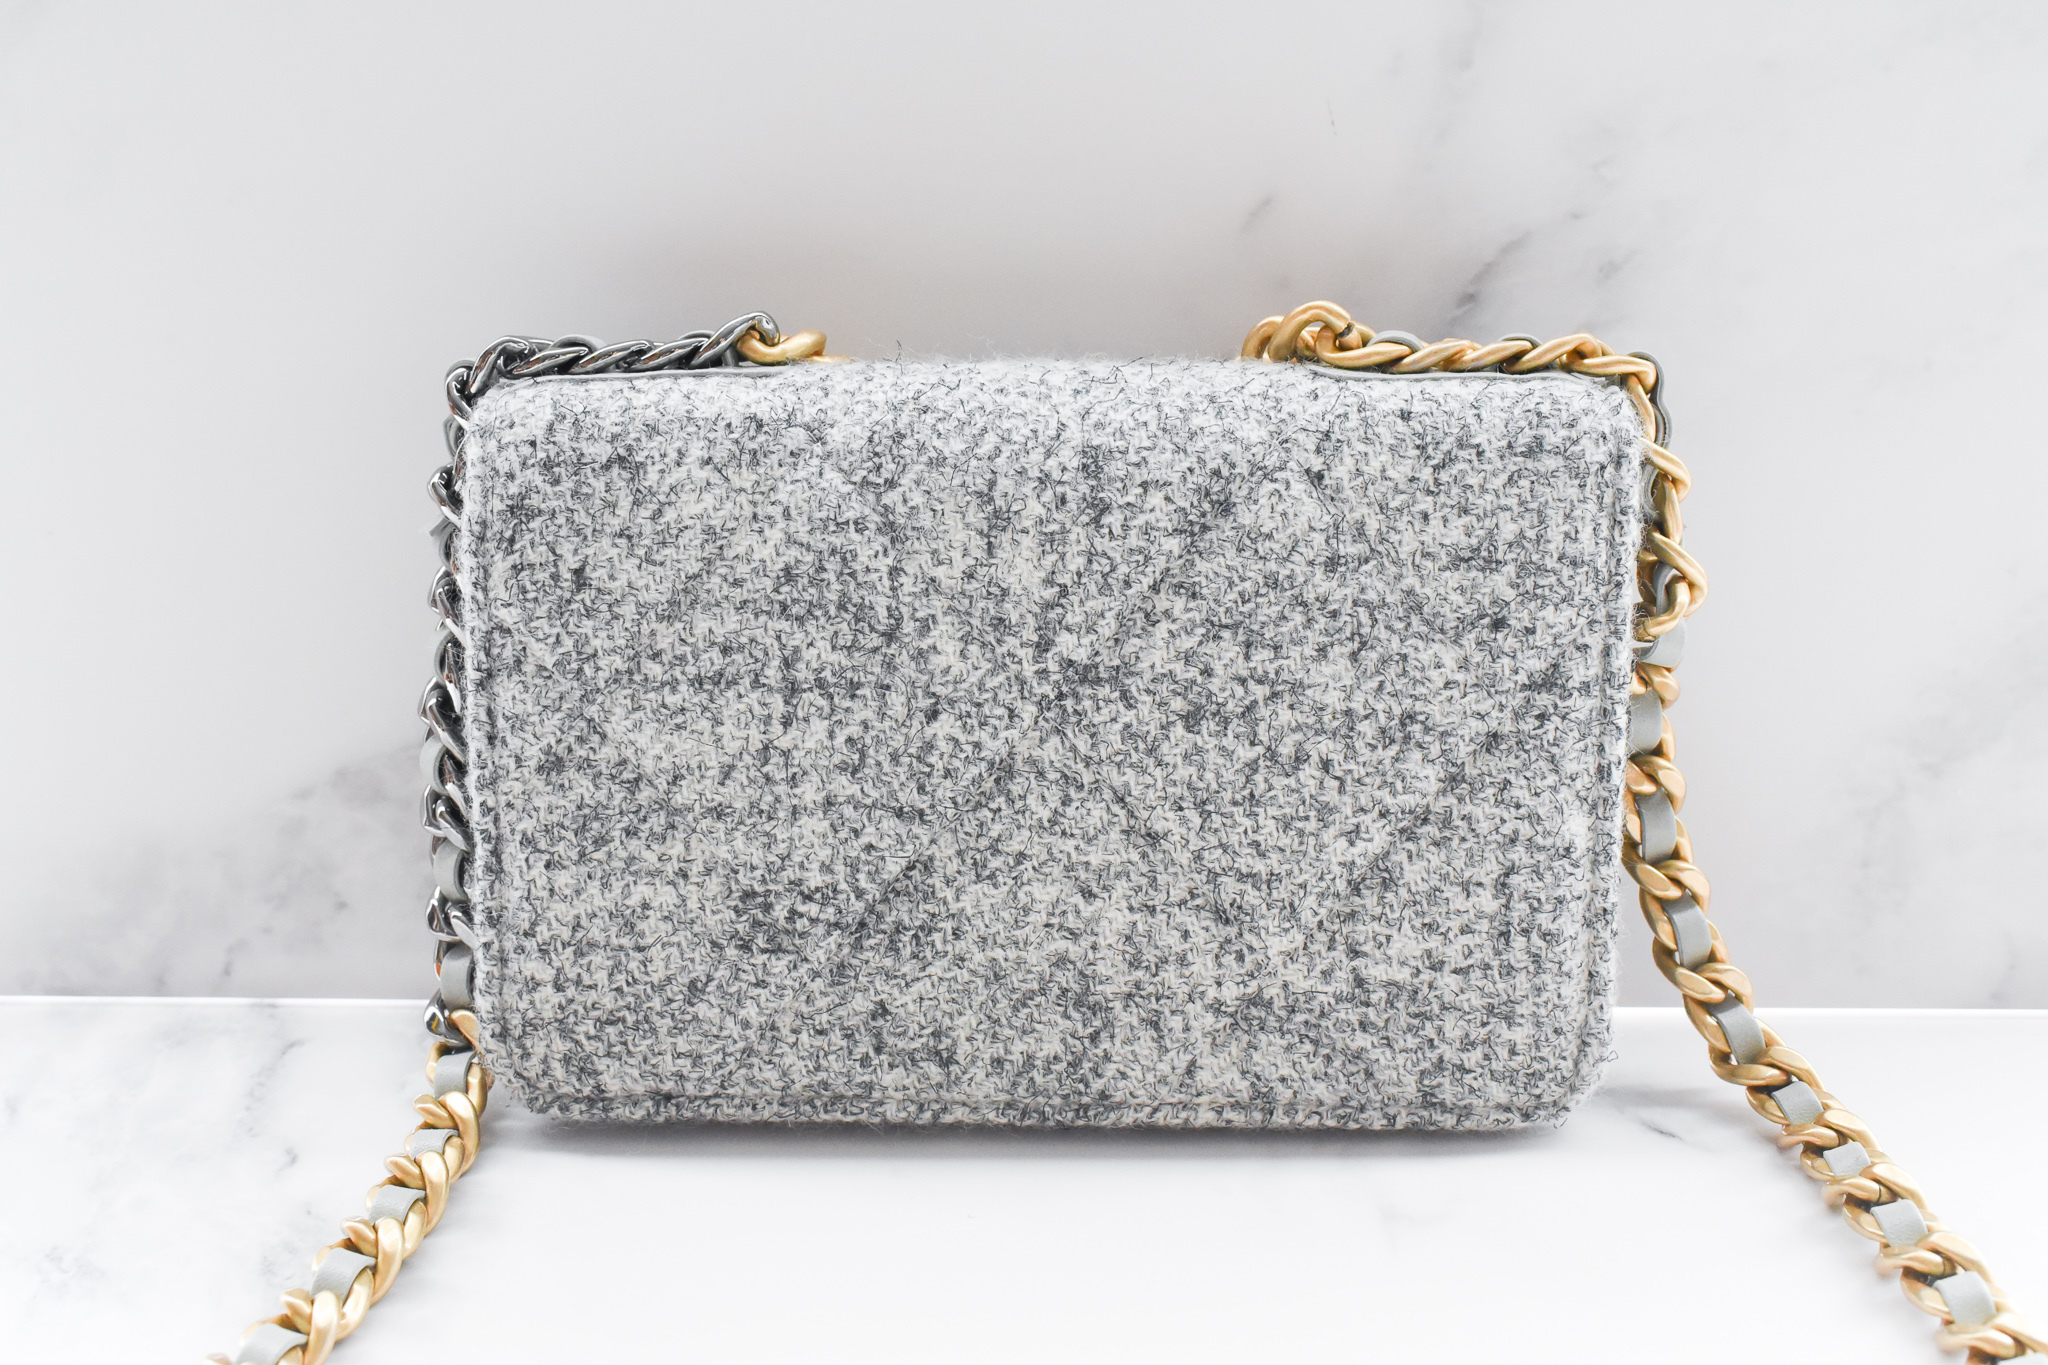 Chanel 19 Wallet on Chain, Gray Knit Tweed, New in Dustbag WA001